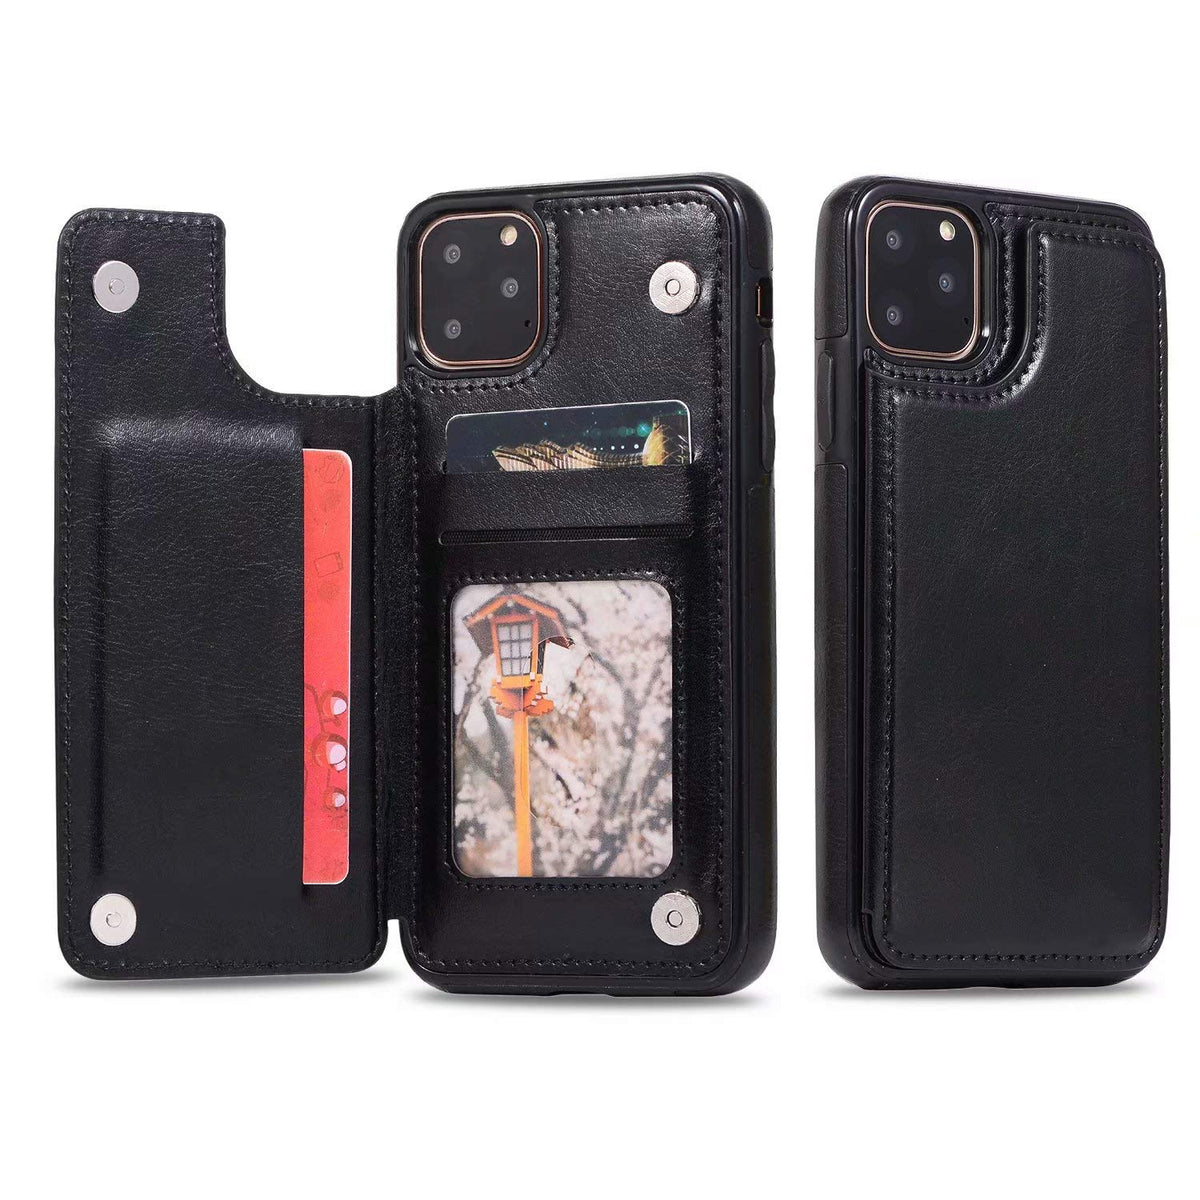 Iphone 11Pro Max (6.5") Leather Backflip Wallet Case Black